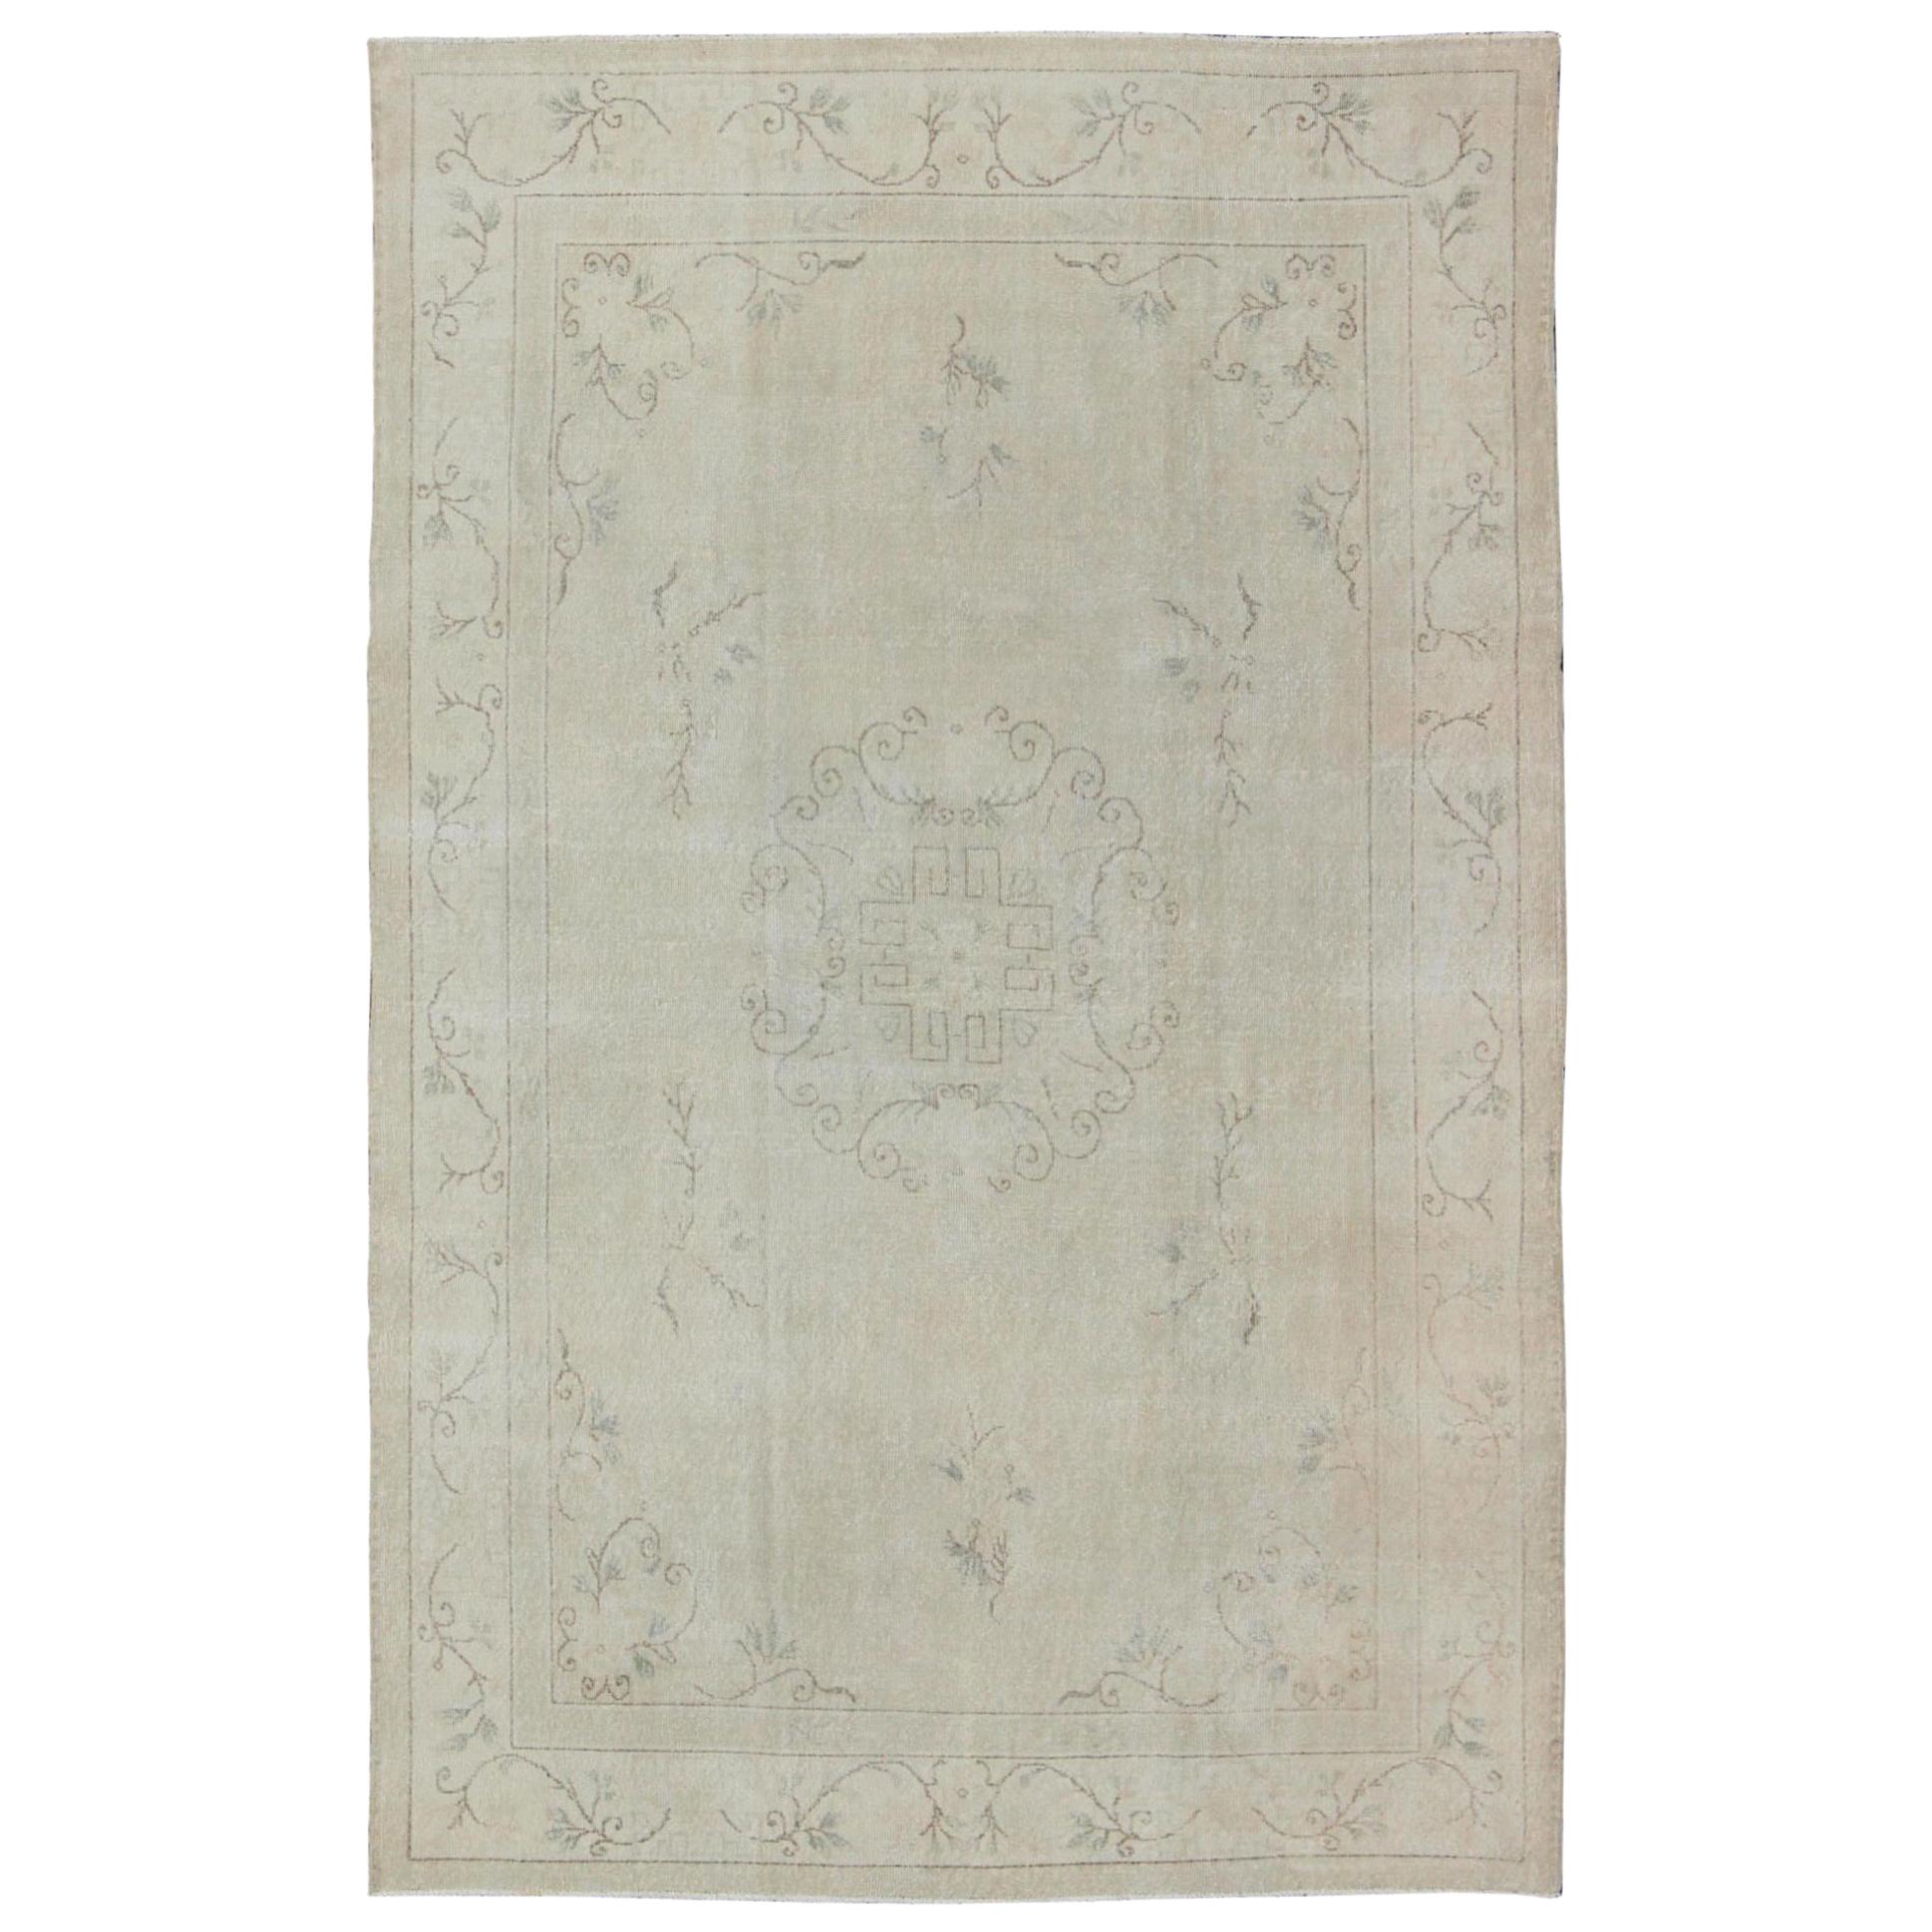 Cream and Gray Colored Midcentury Turkish Rug in Medallion Khotan Design For Sale